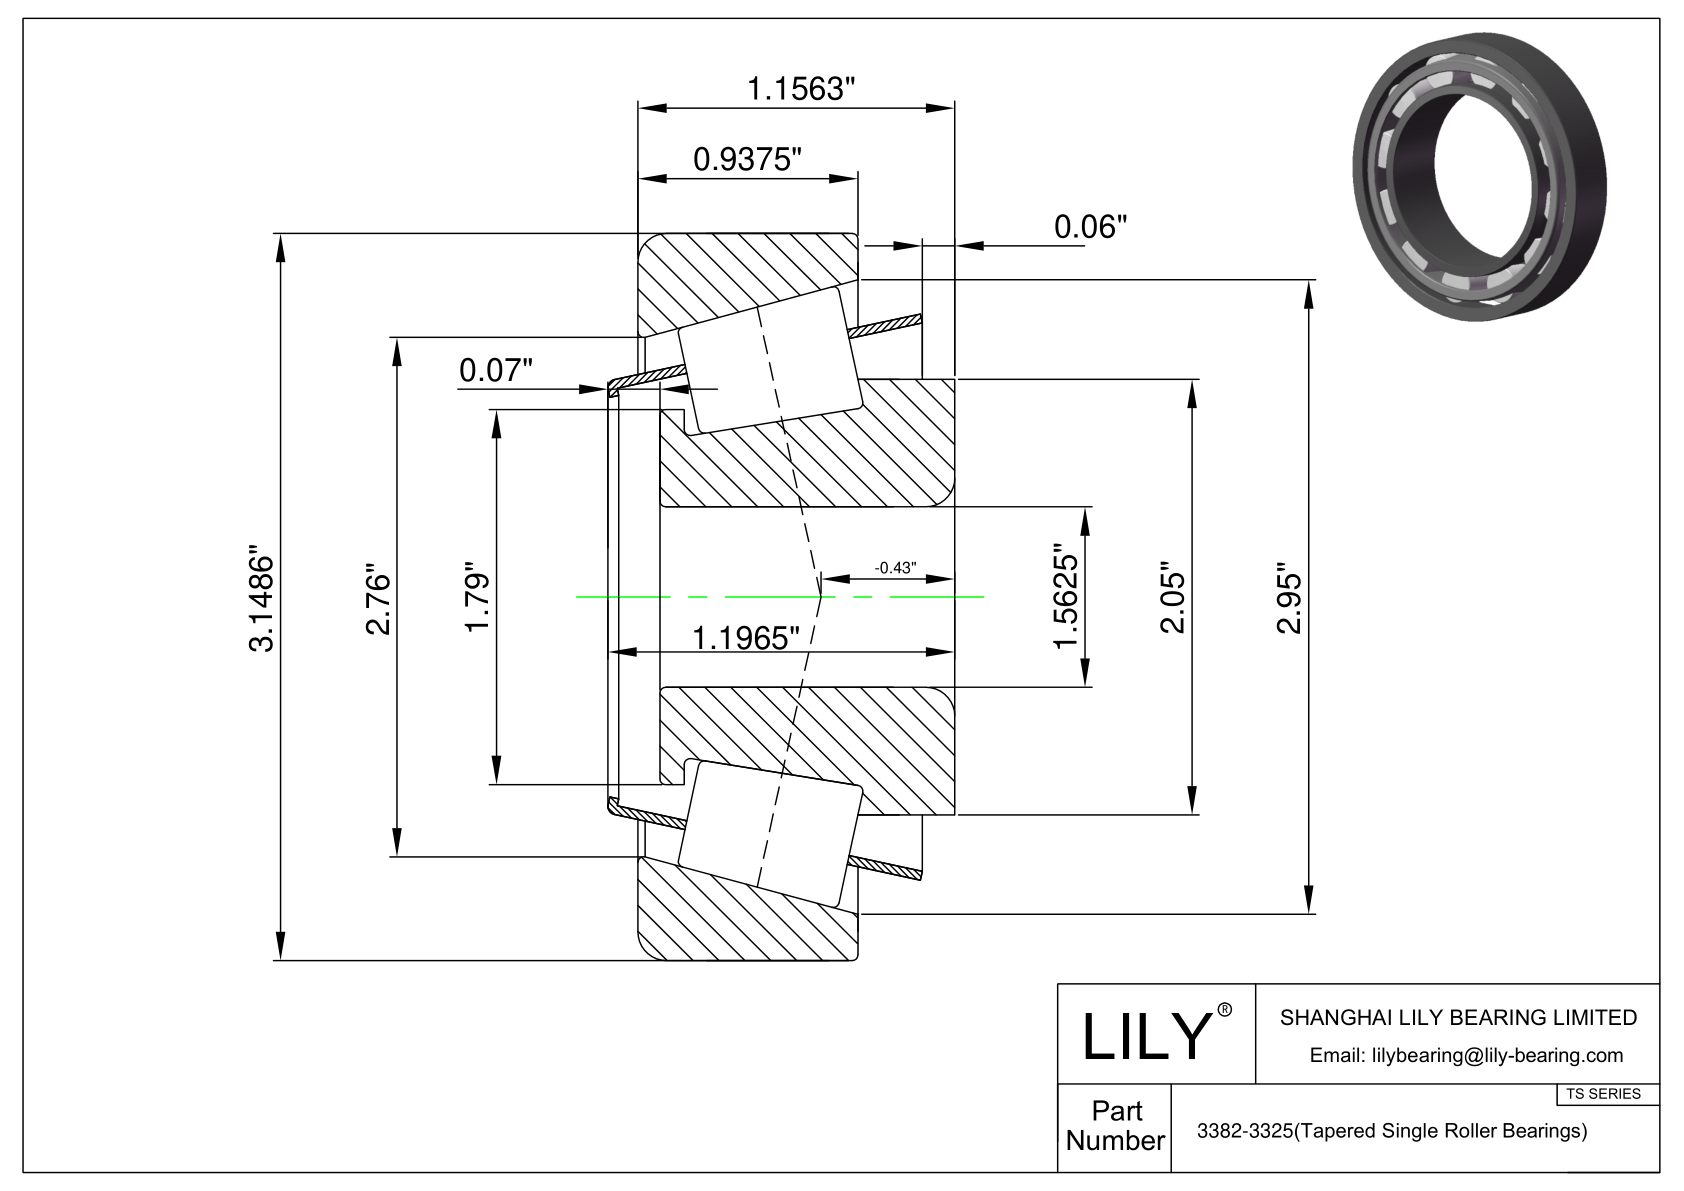 3382-3325 TS (Tapered Single Roller Bearings) (Imperial) cad drawing